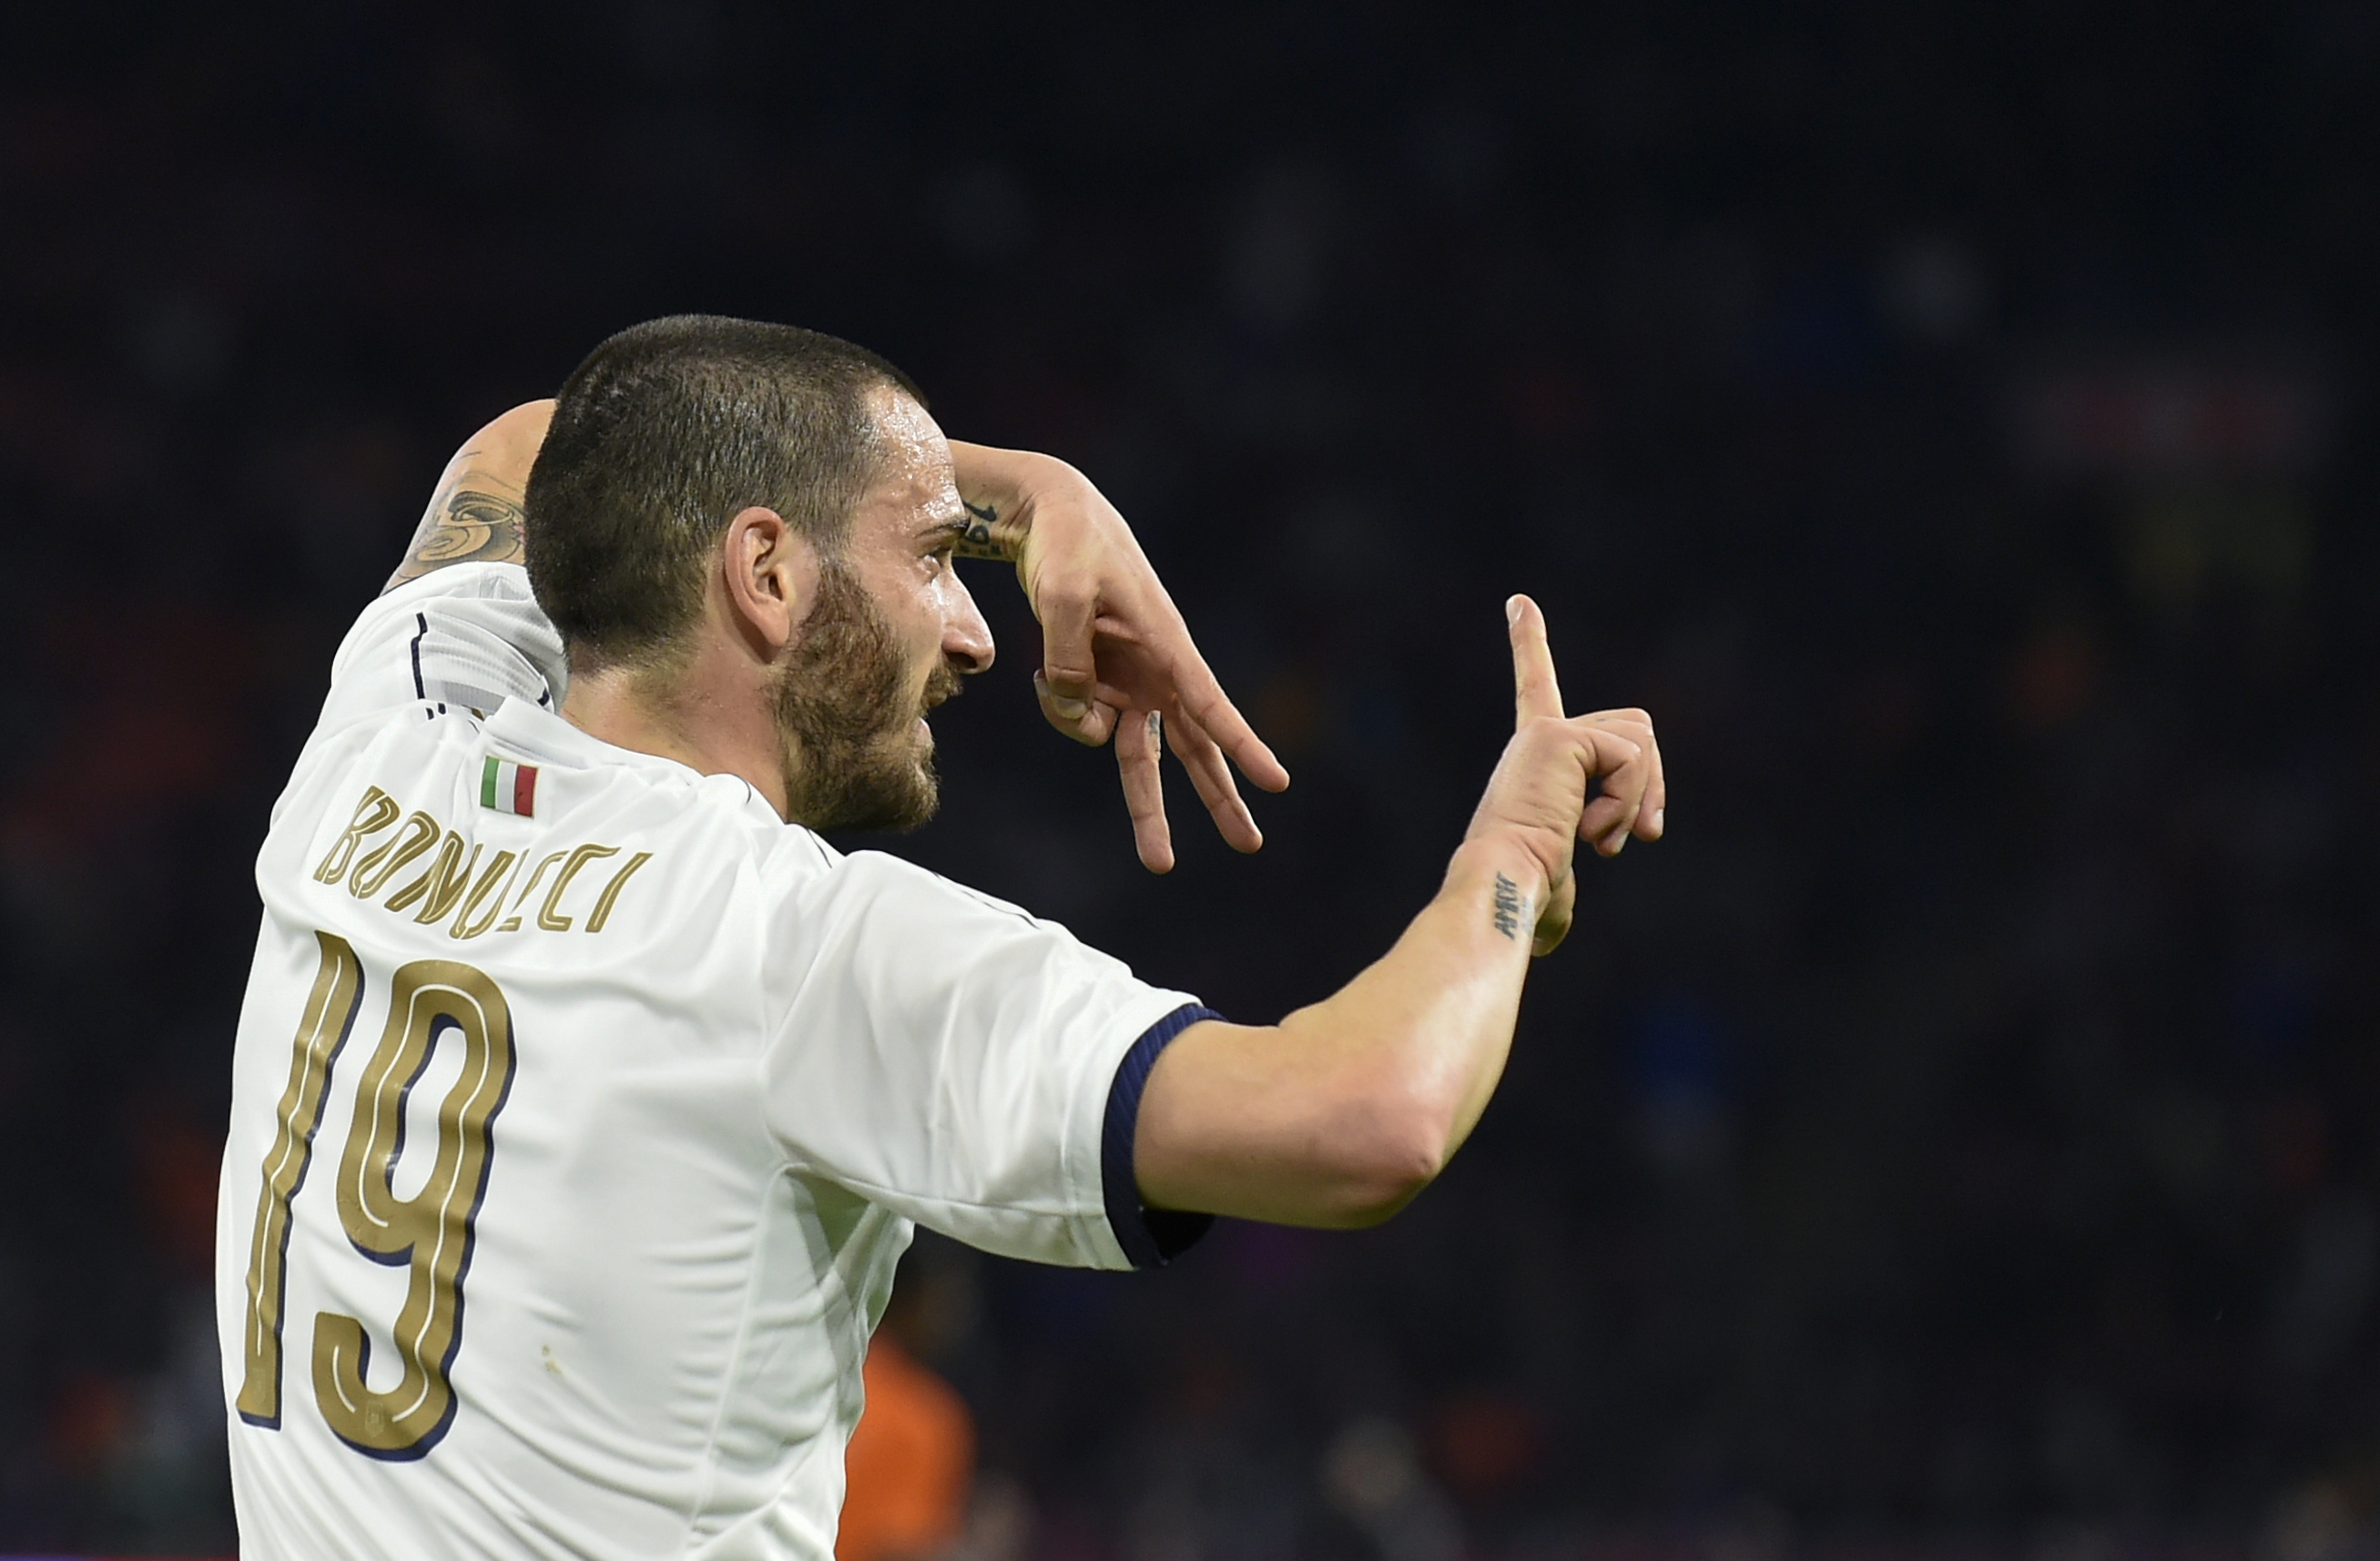 Italy's Leonardo Bonucci celebrates after scoring a goal during the friendly football match between The Netherlands and Italy at the Arena Stadium, on March 28, 2017 in Amsterdam. / AFP PHOTO / JOHN THYS        (Photo credit should read JOHN THYS/AFP/Getty Images)